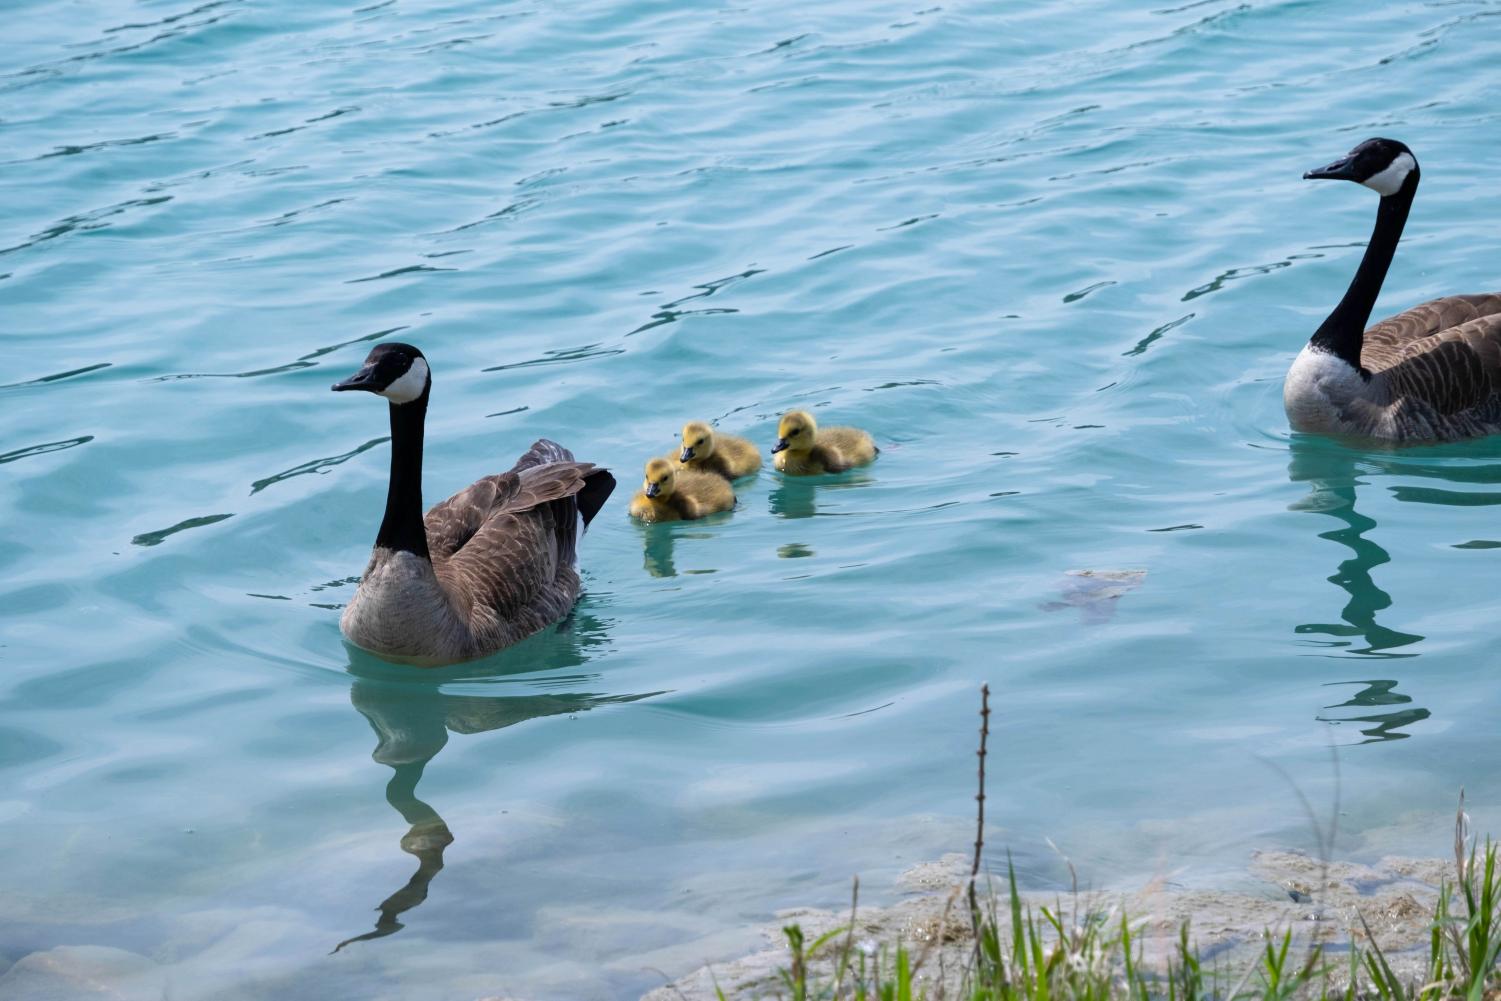 Three young goslings swim with two geese in blue water.